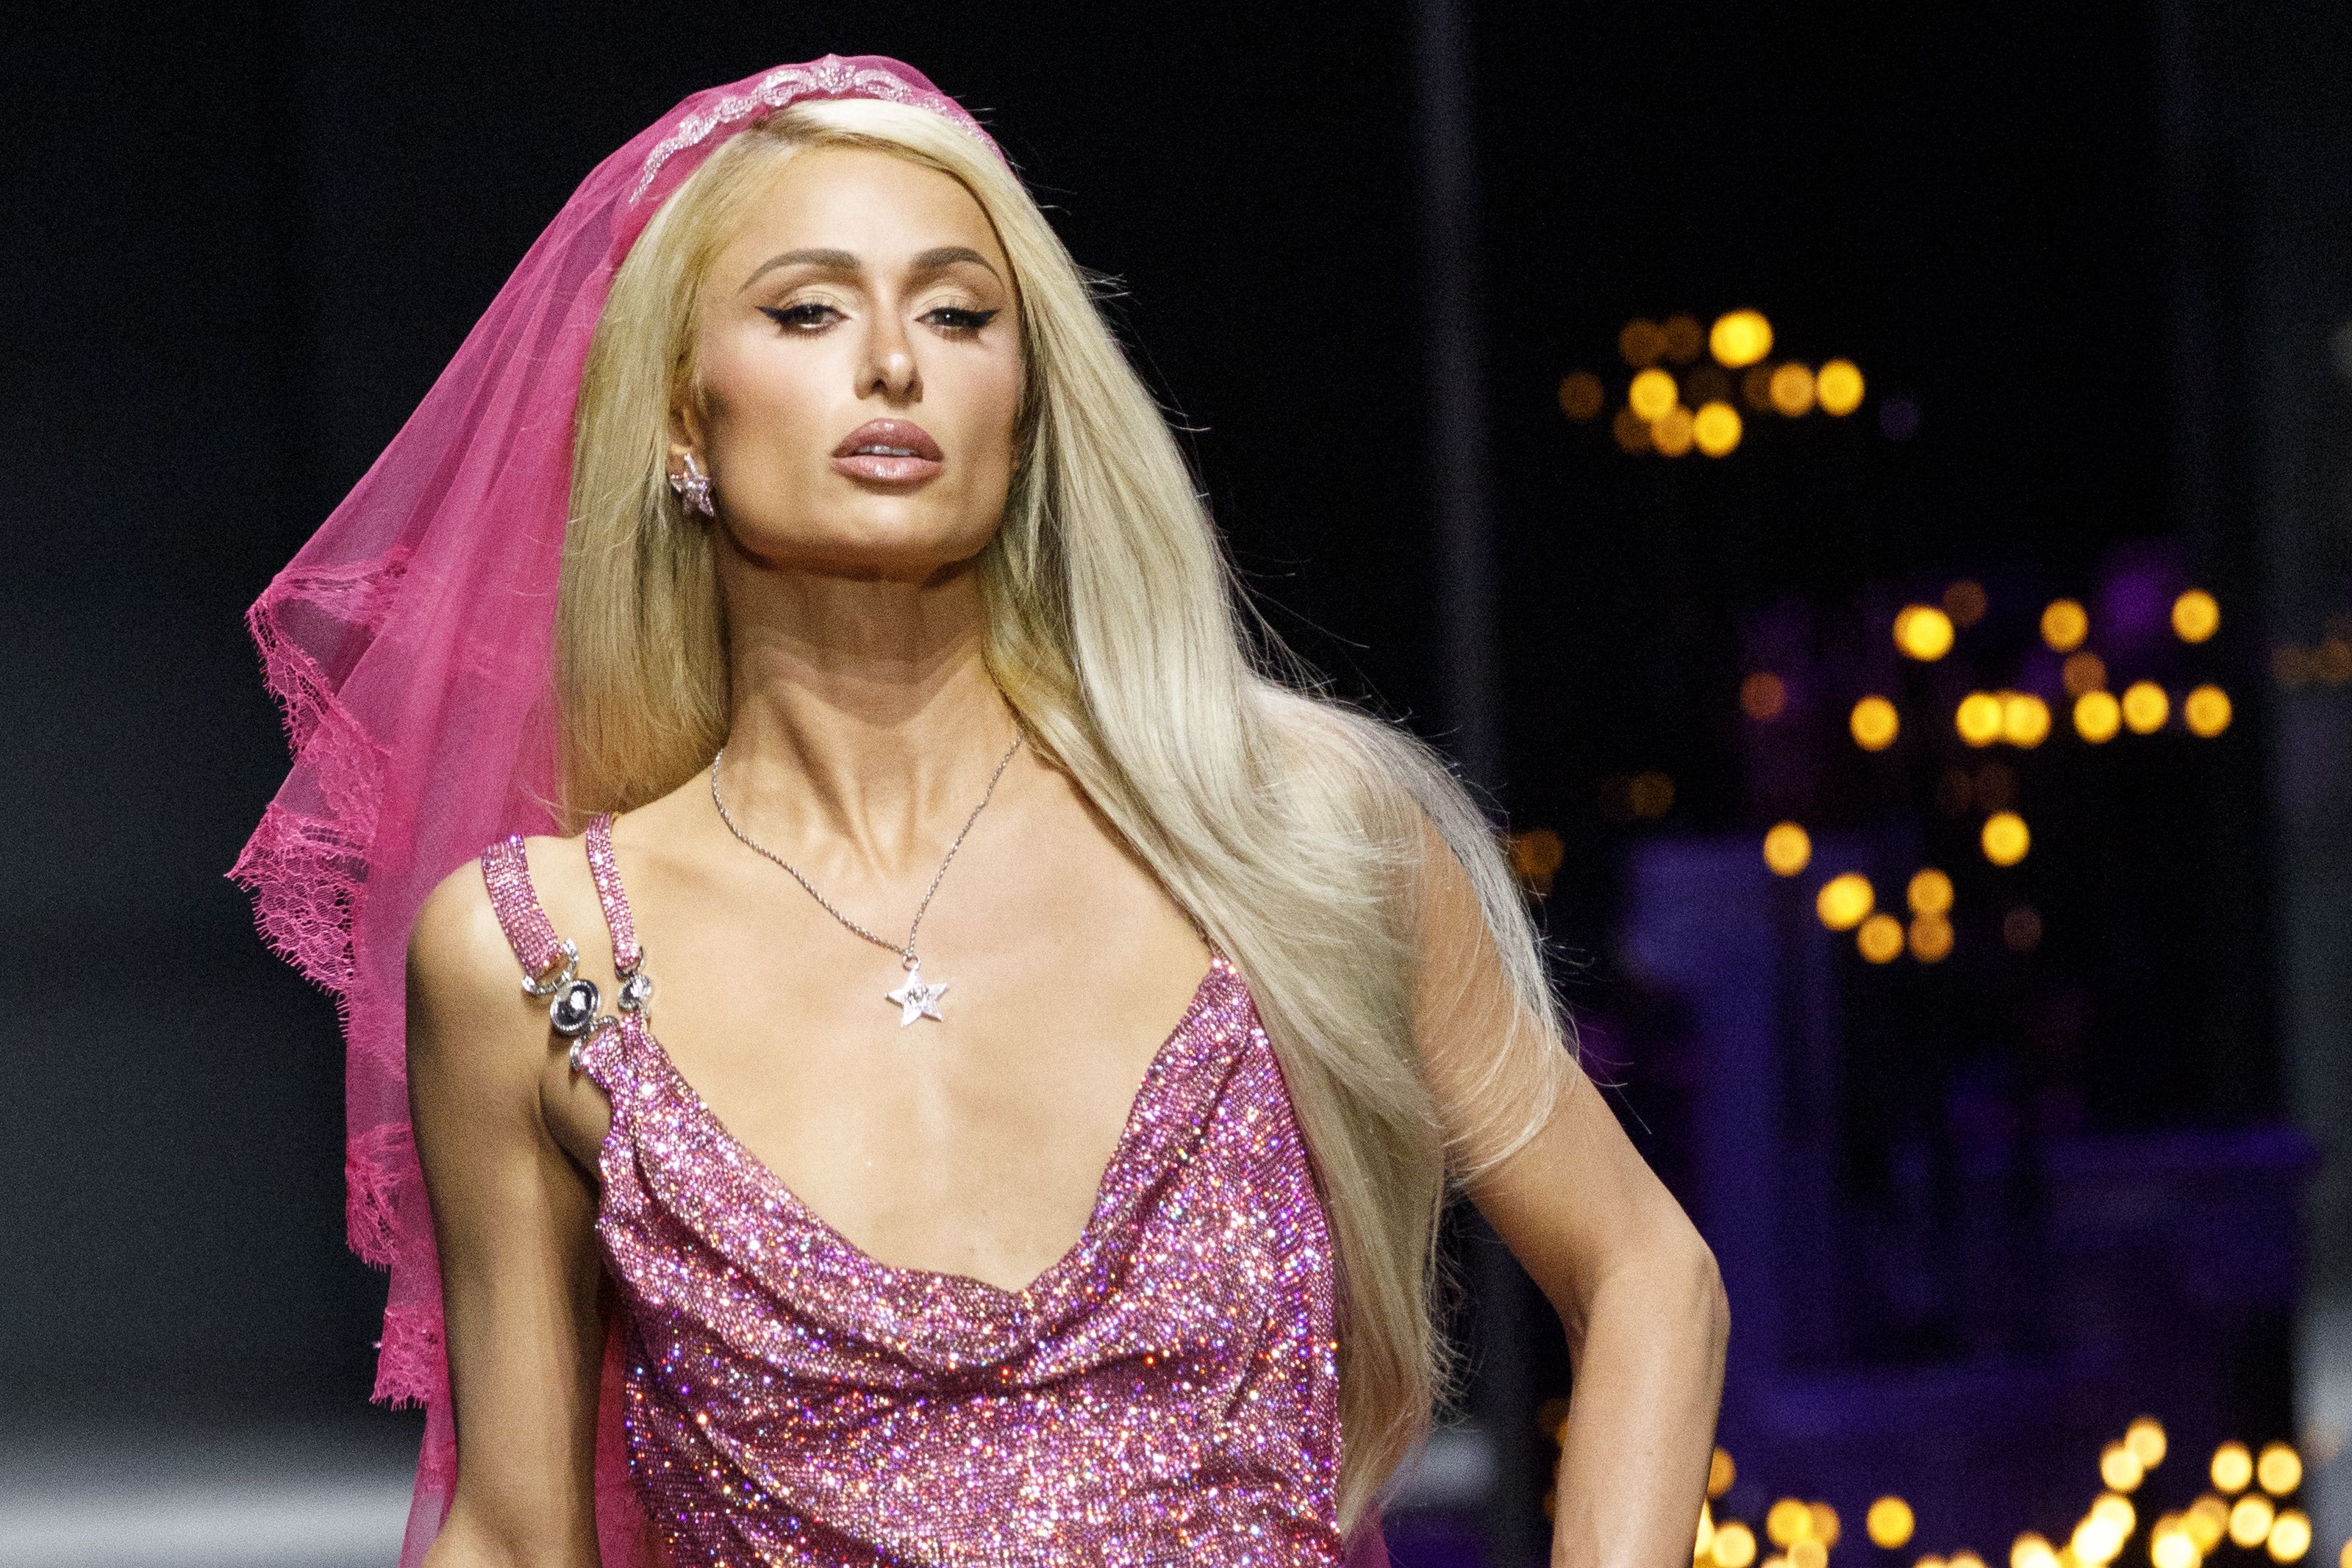 Paris Hilton's Versace make-up was as iconic as her outfit